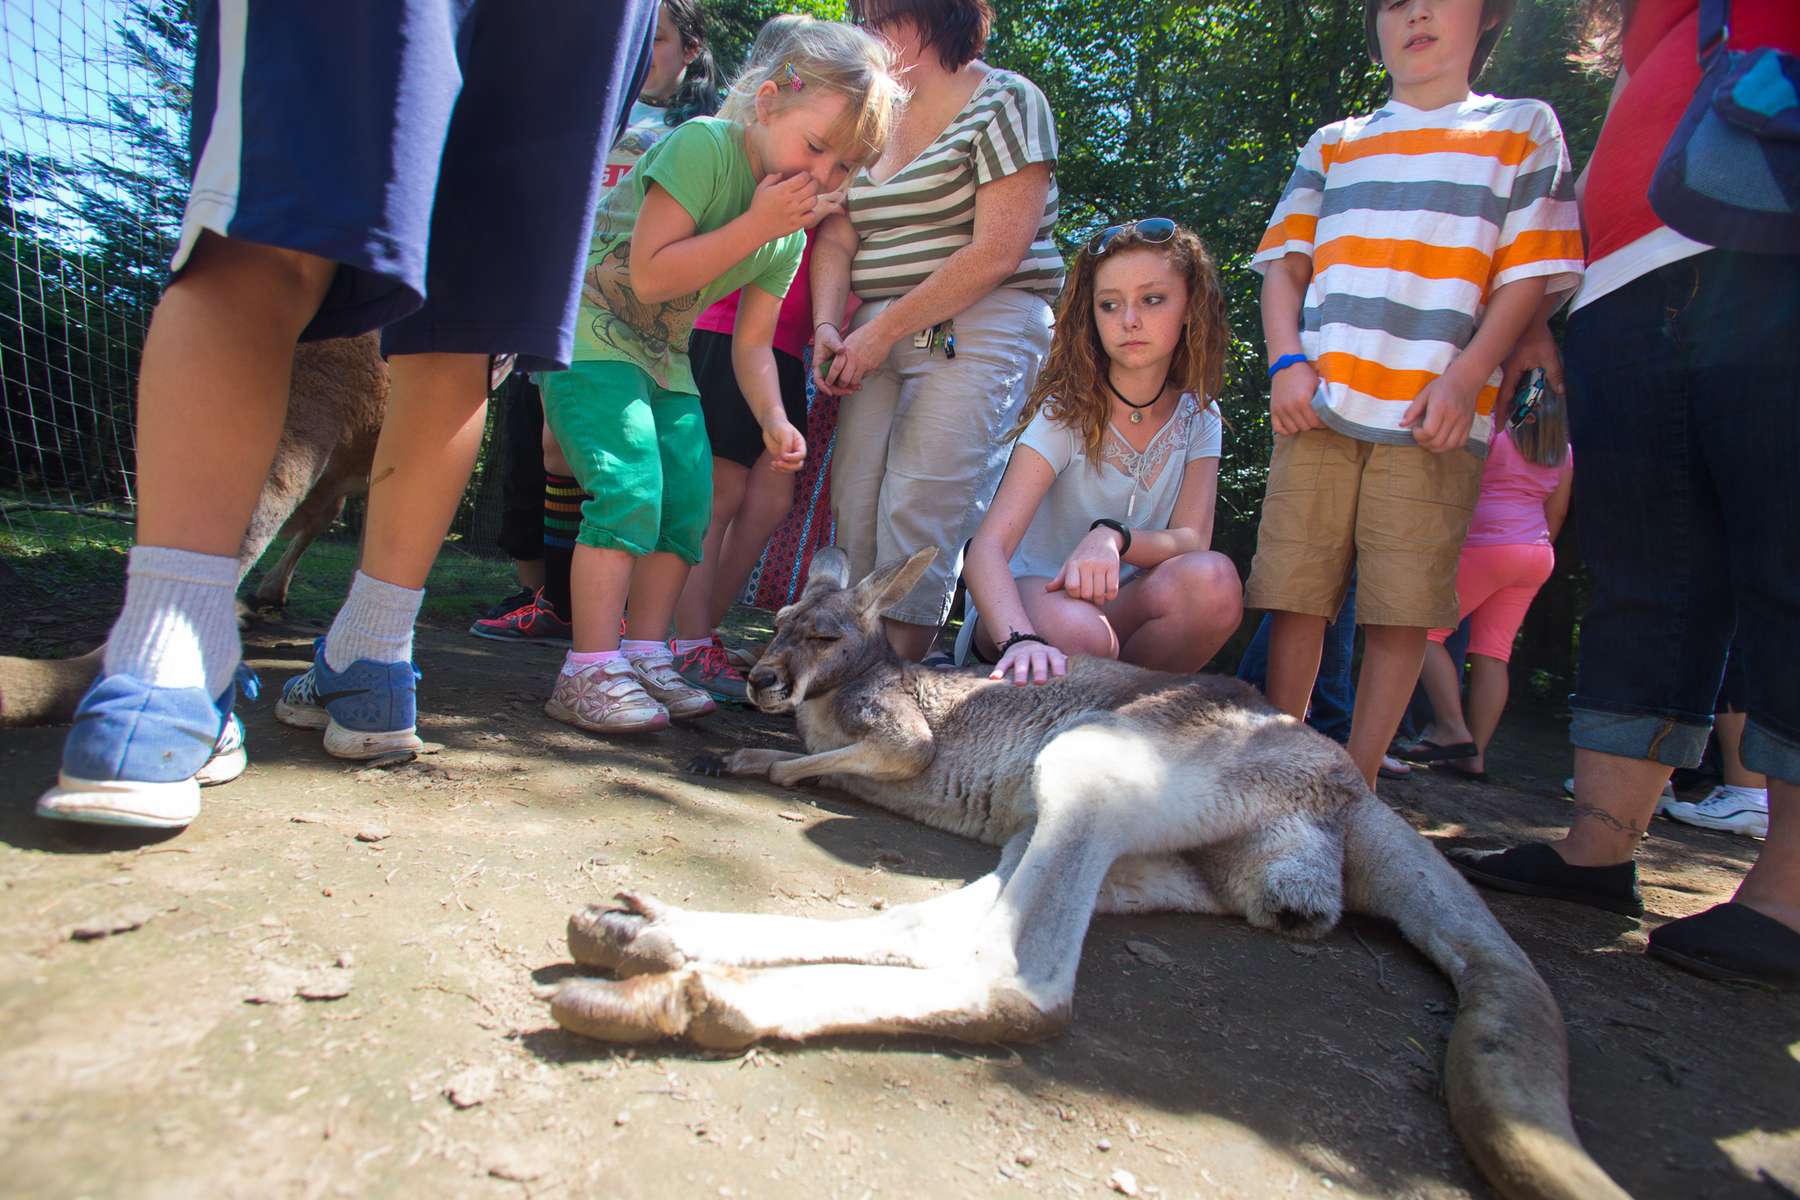 Children pet a wallaby at the Outback Kangaroo Farm in Arlington, Wash. on July 20, 2016. (photo © Karen Ducey Photography)